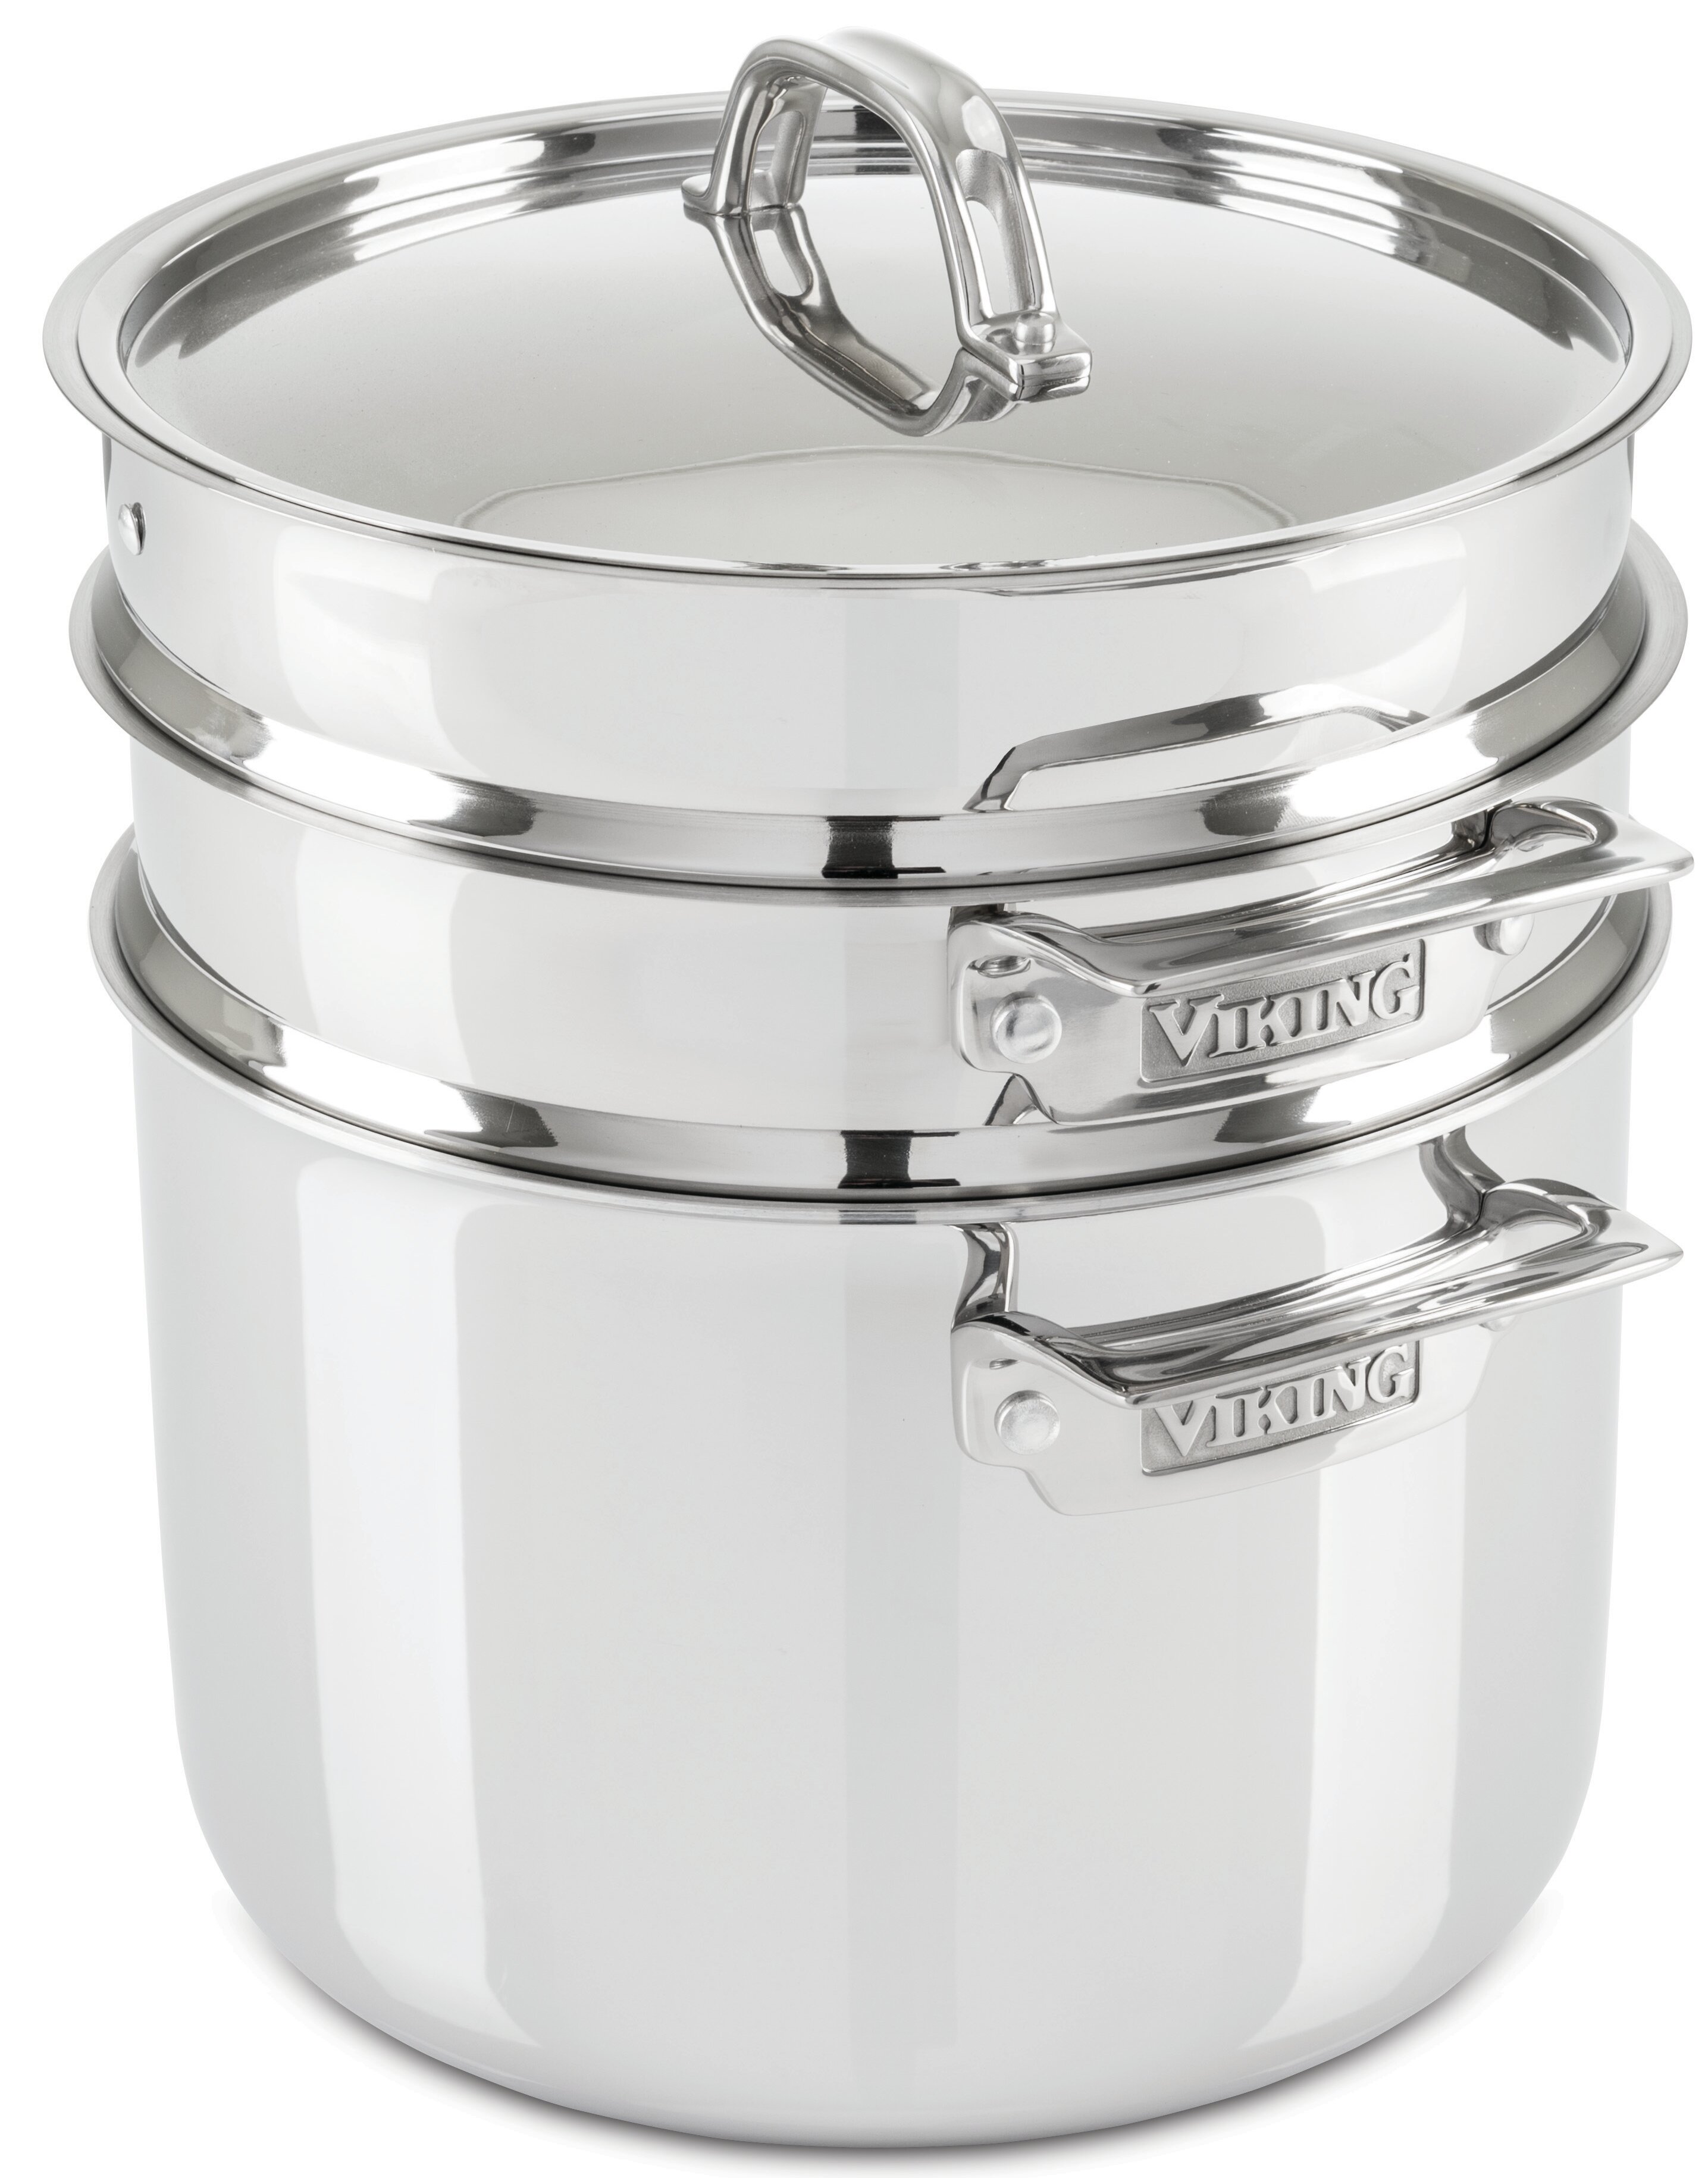 Set Details about   Viking 3 Ply STAINLESS STEEL  POT GLASS LID & PASTA INSERT 8 QT40011-3008B 